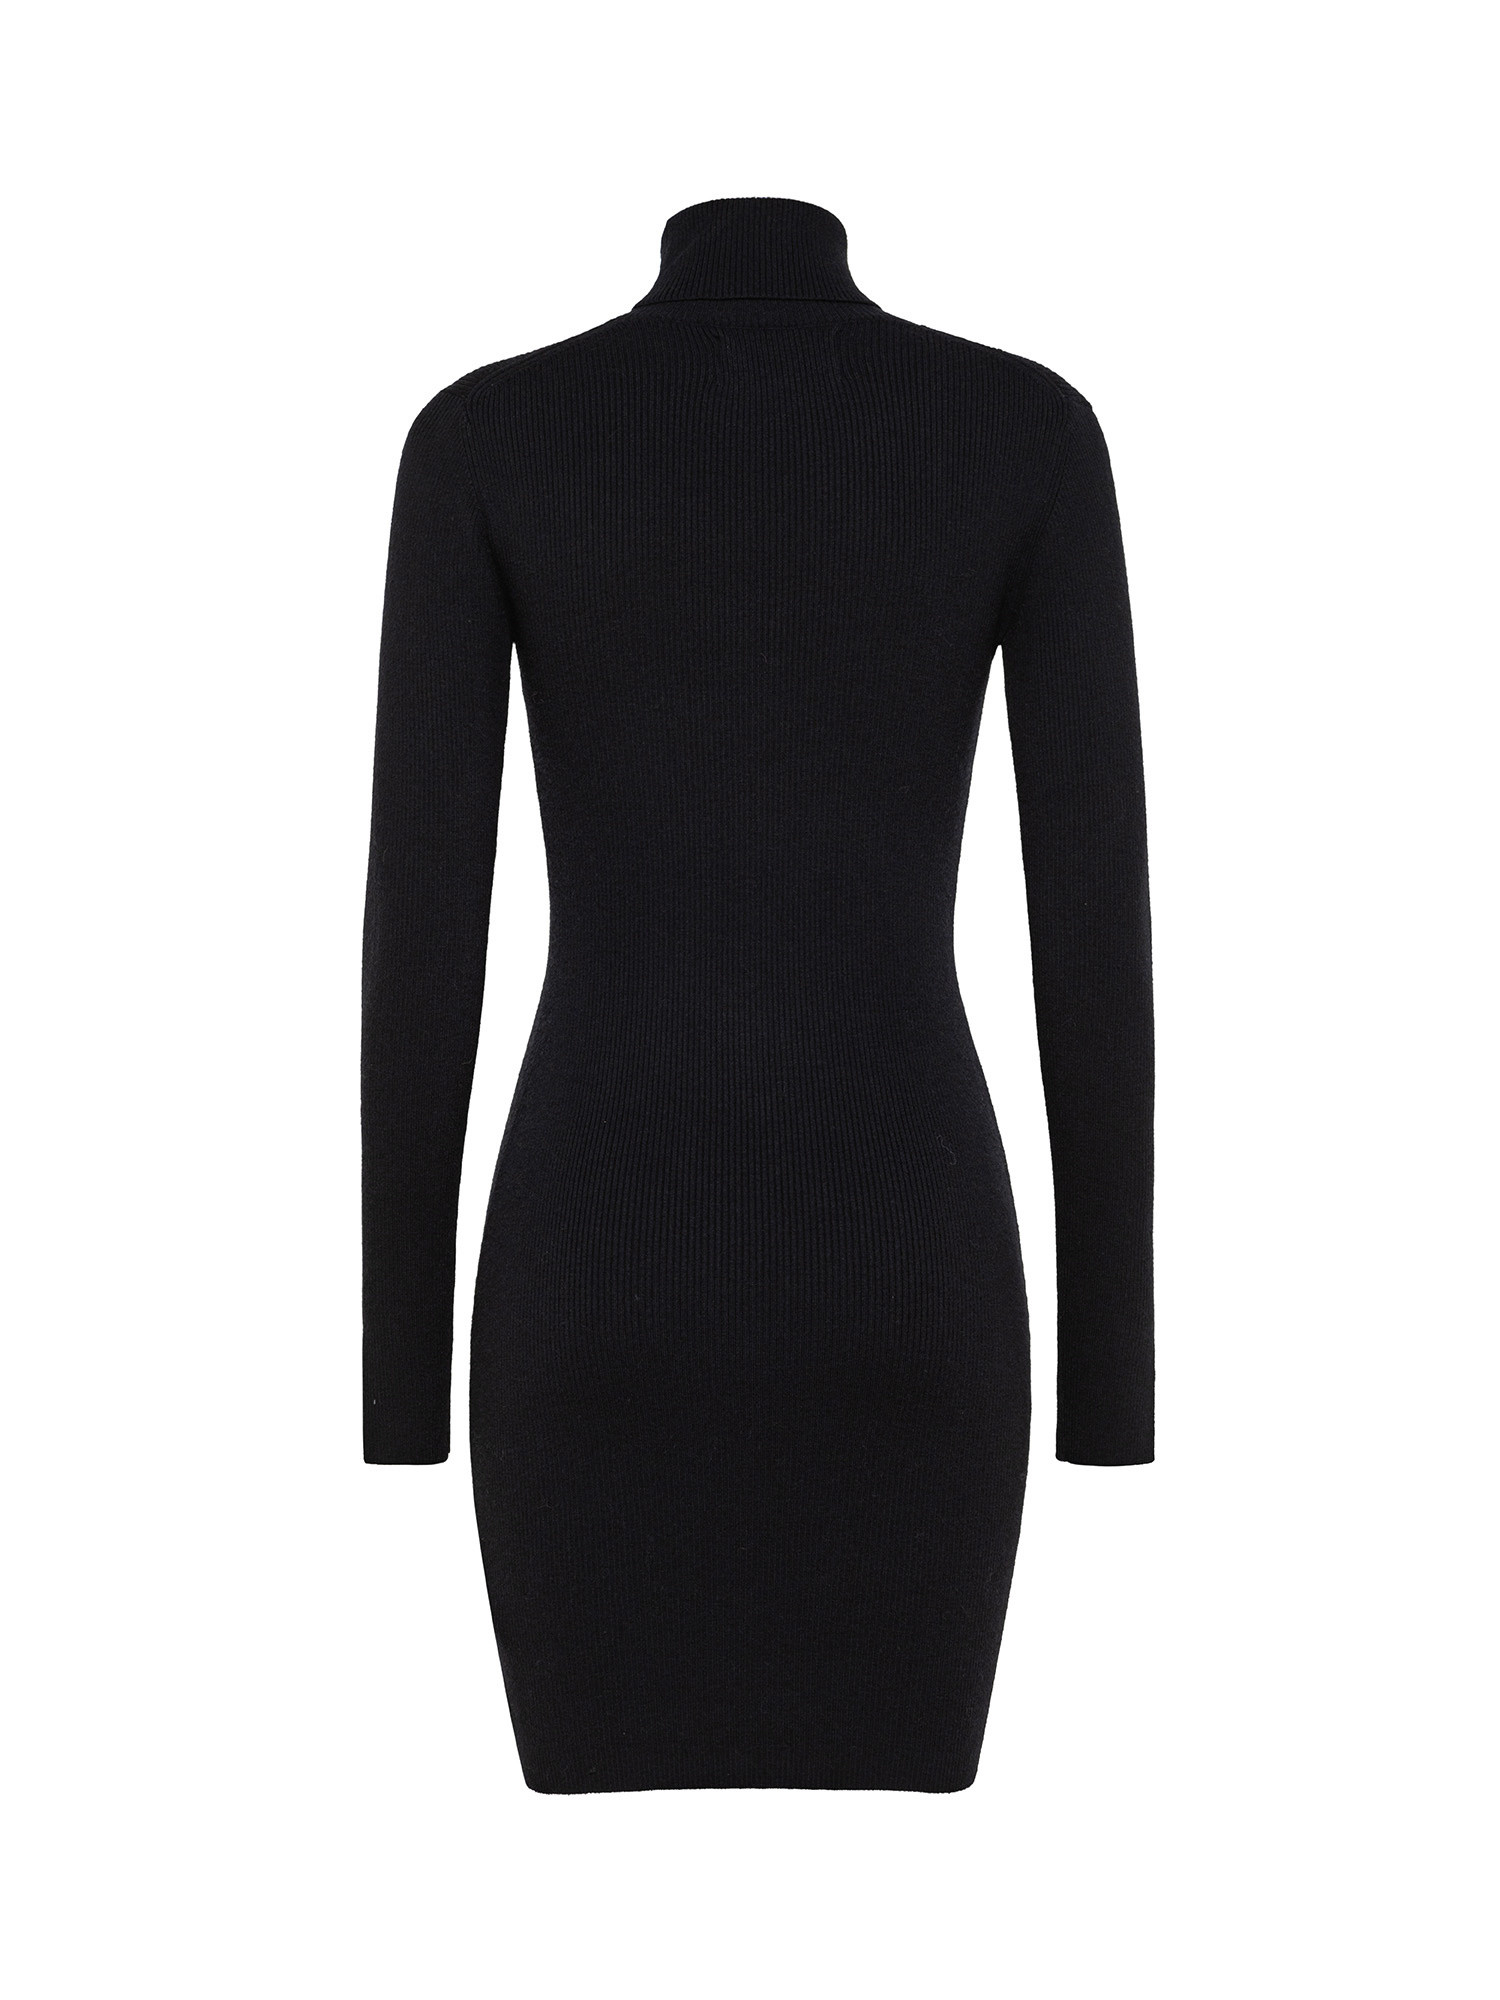 Ribbed dress with high collar, Black, large image number 0